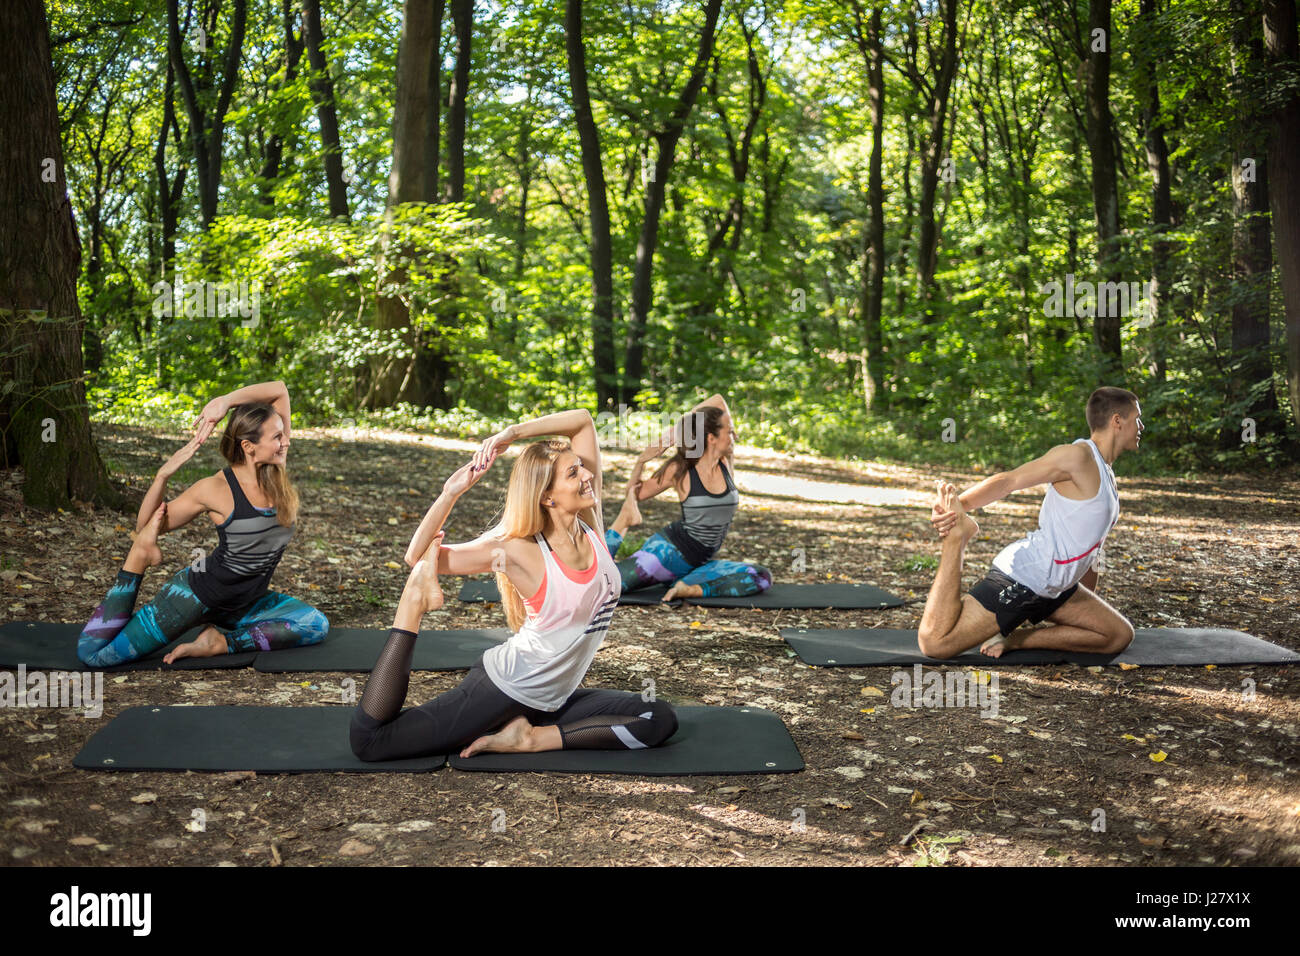 Fitness group practice relaxing anti-stress stretching in peace and harmony of nature Stock Photo